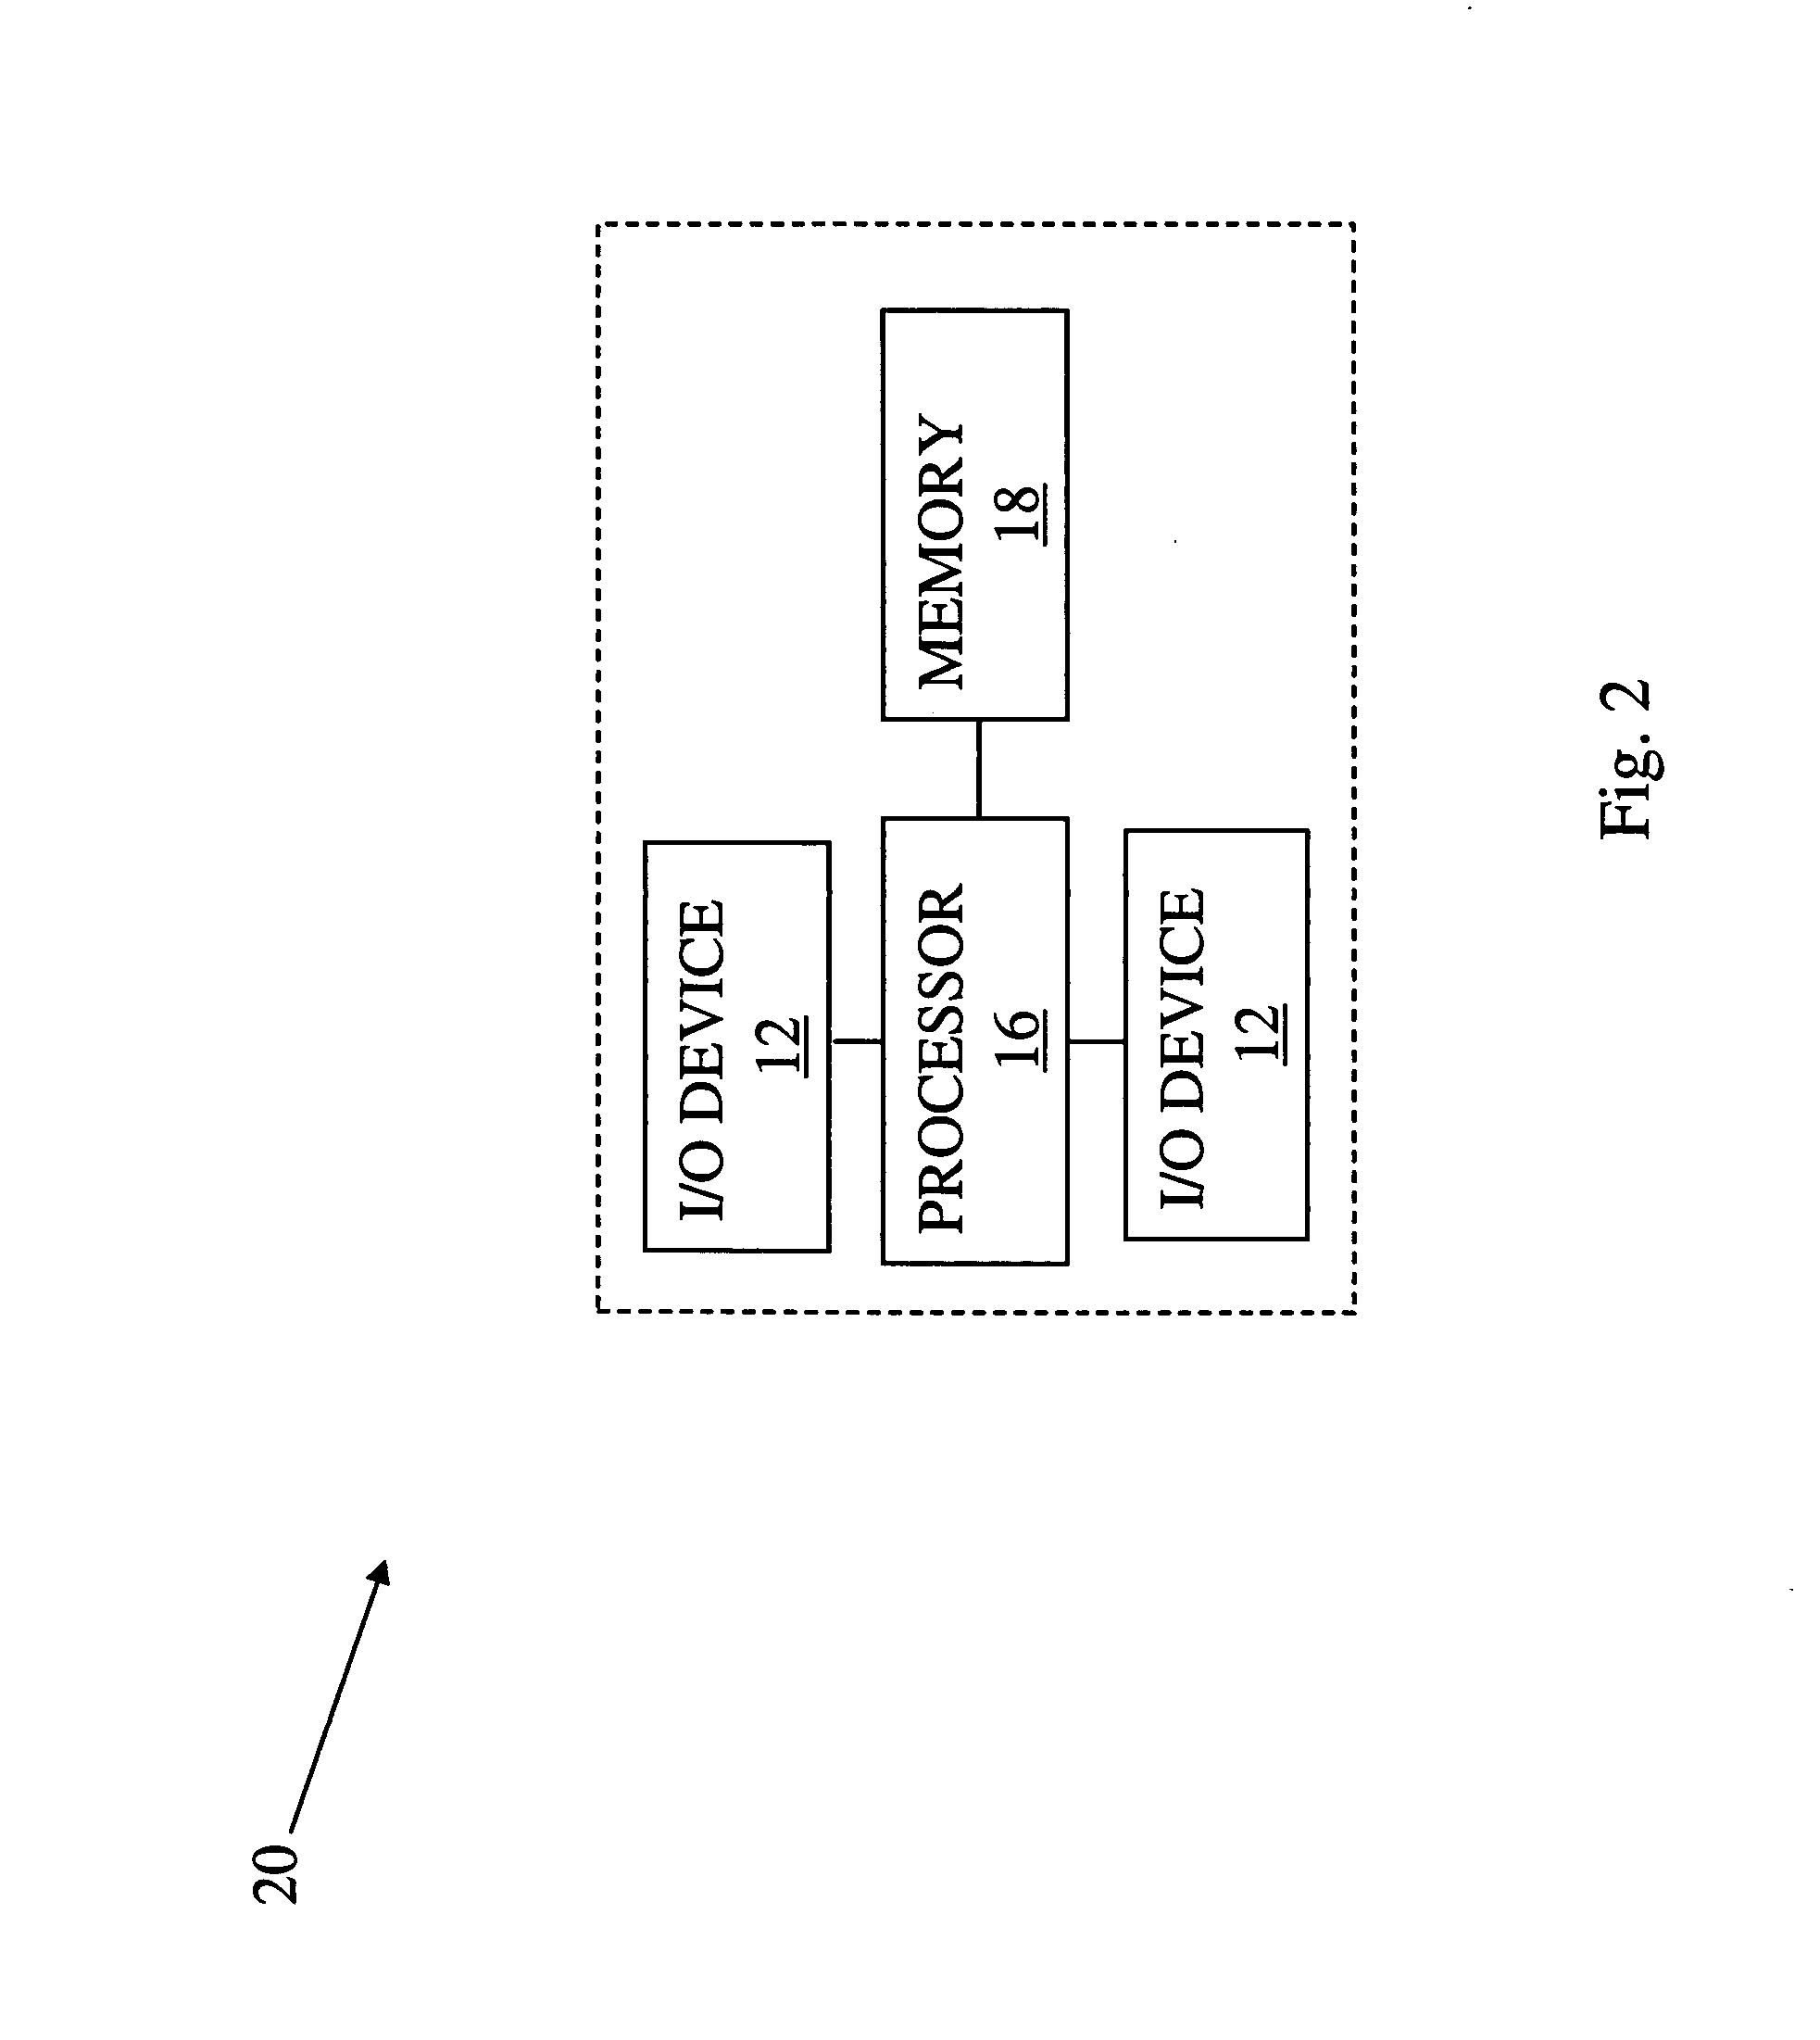 Method, apparatus, and system for object recognition, object segmentation and knowledge acquisition